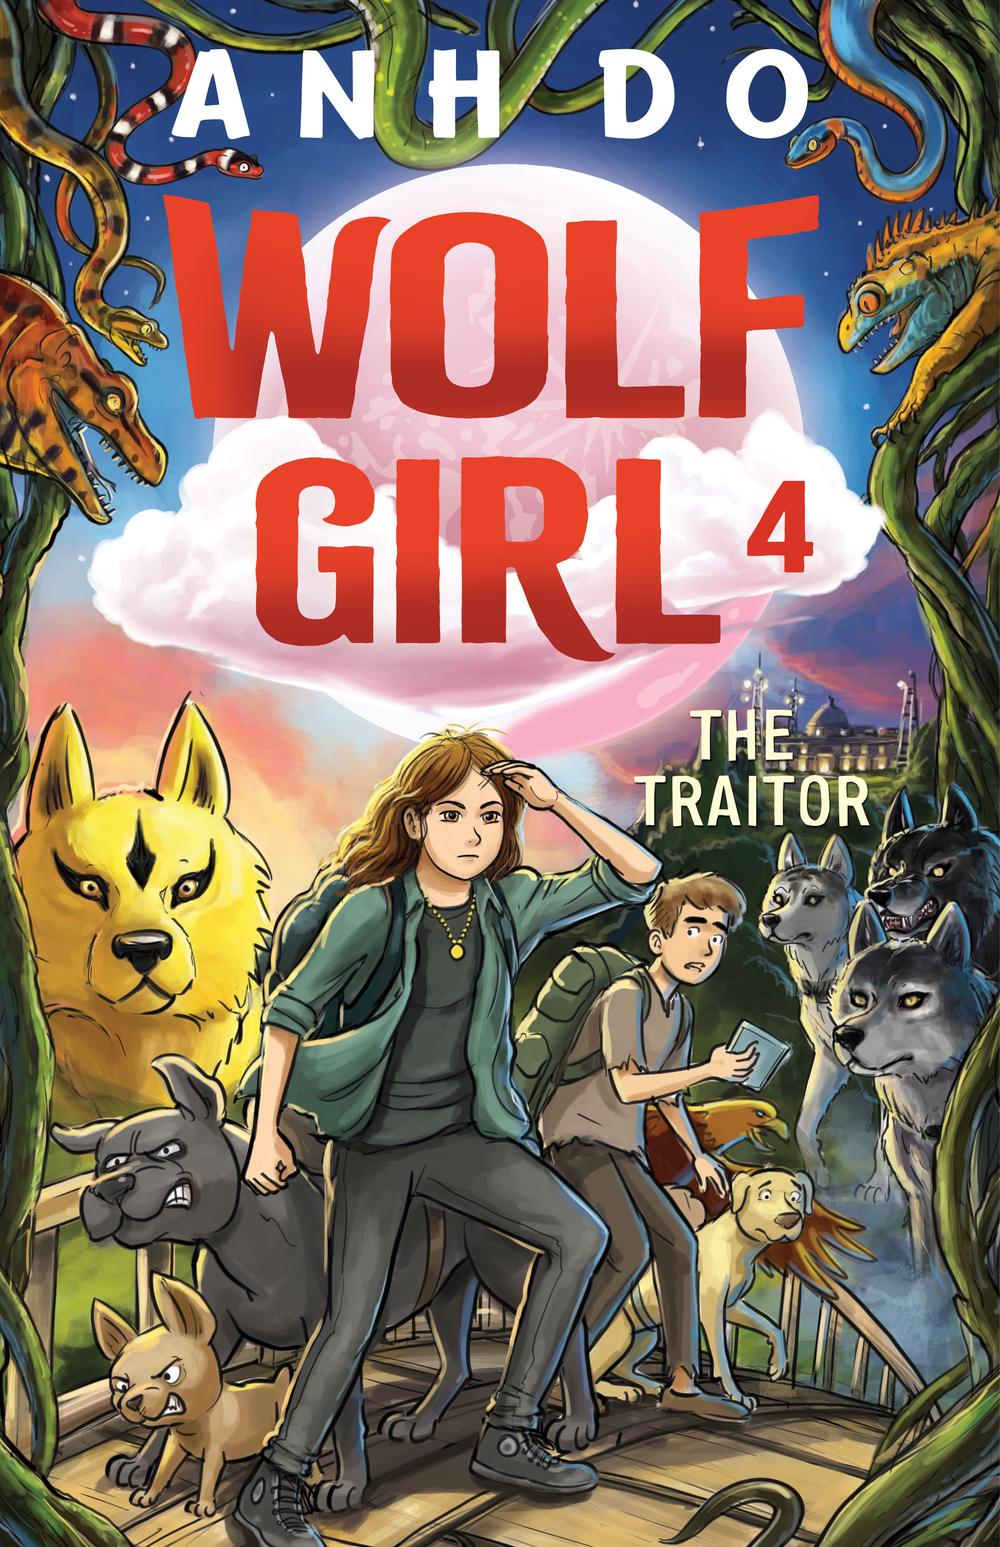 Wolf Girl 4 By Anh Do Paperback 9781760877866 Buy Online At The Nile